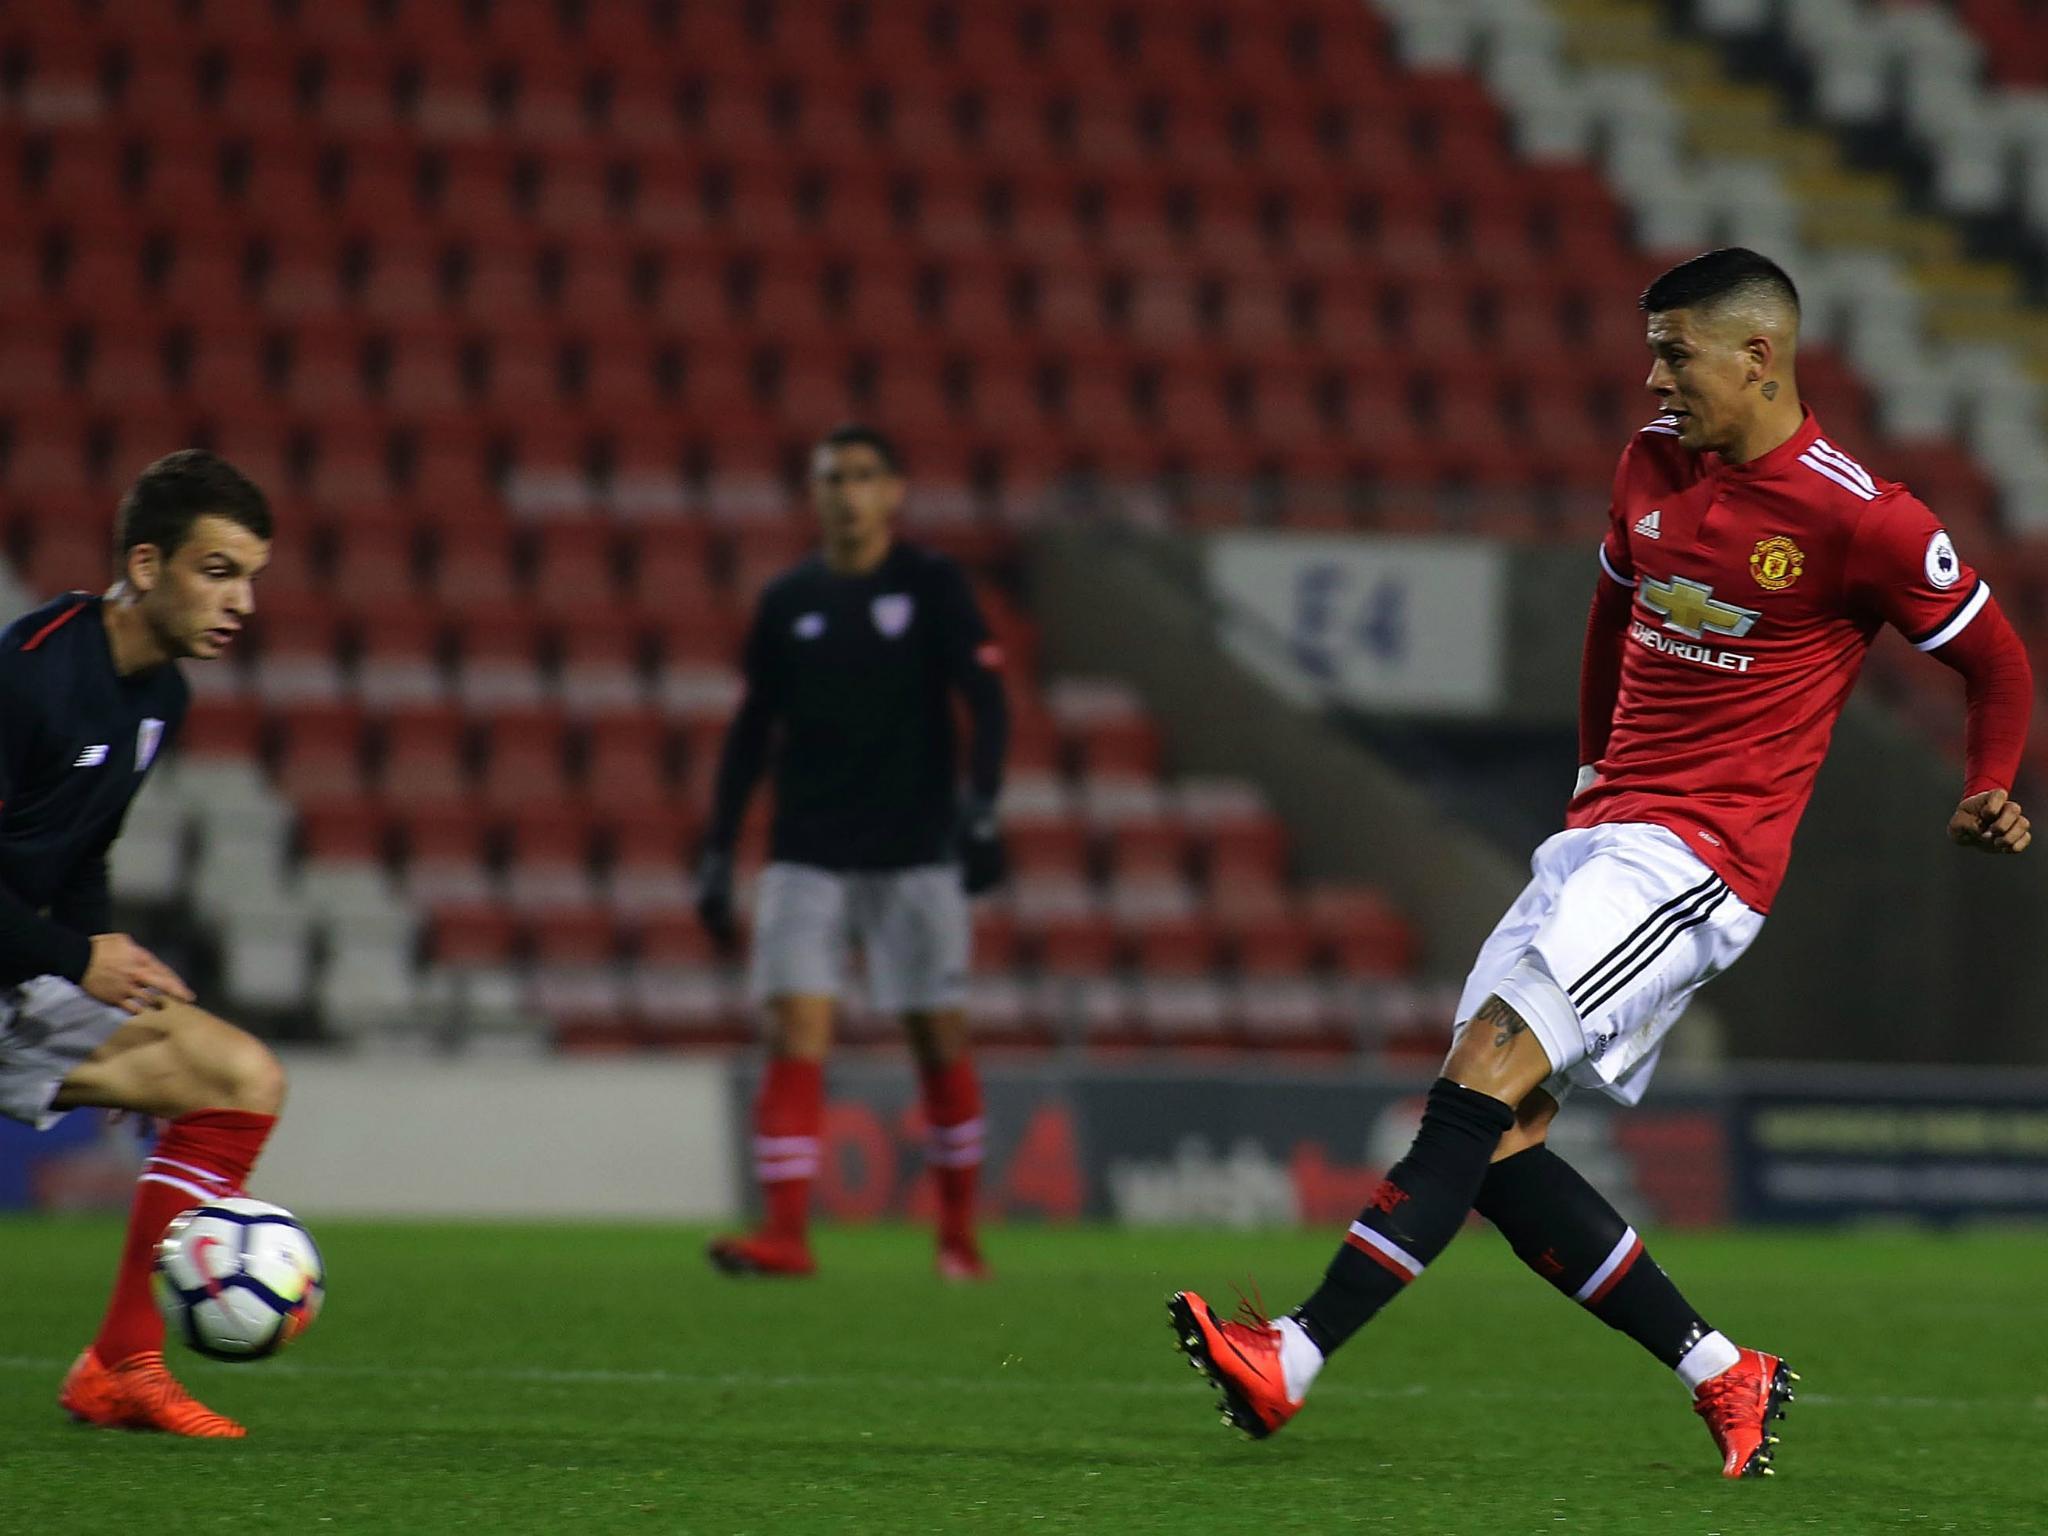 Marcos Rojo returned for Manchester United Reserves against Athletic Bilbao